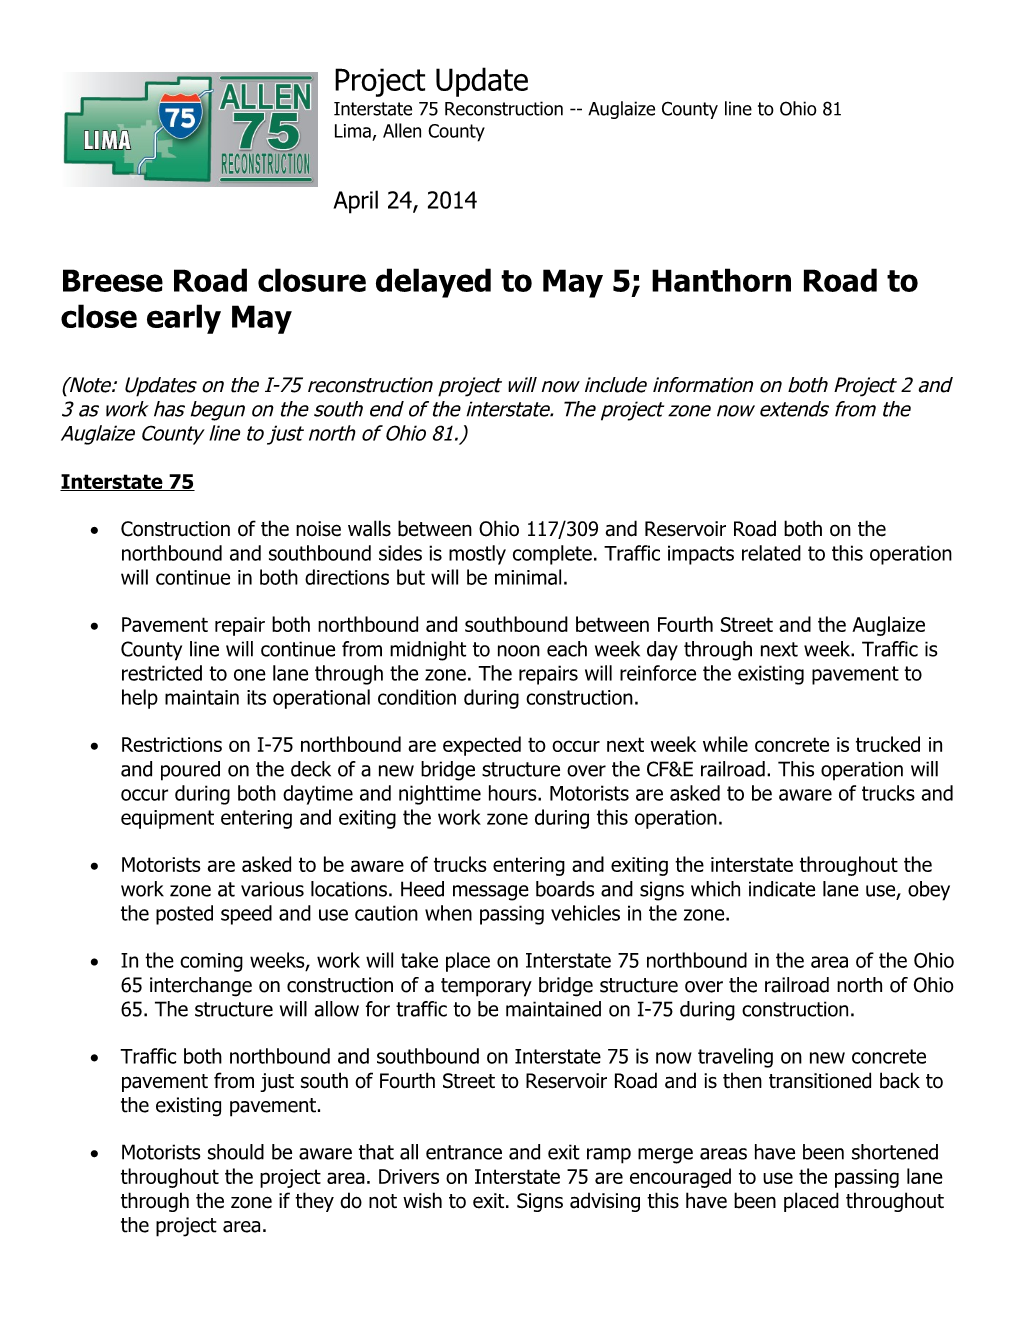 Breese Road Closure Delayed to May 5; Hanthorn Road to Close Early May